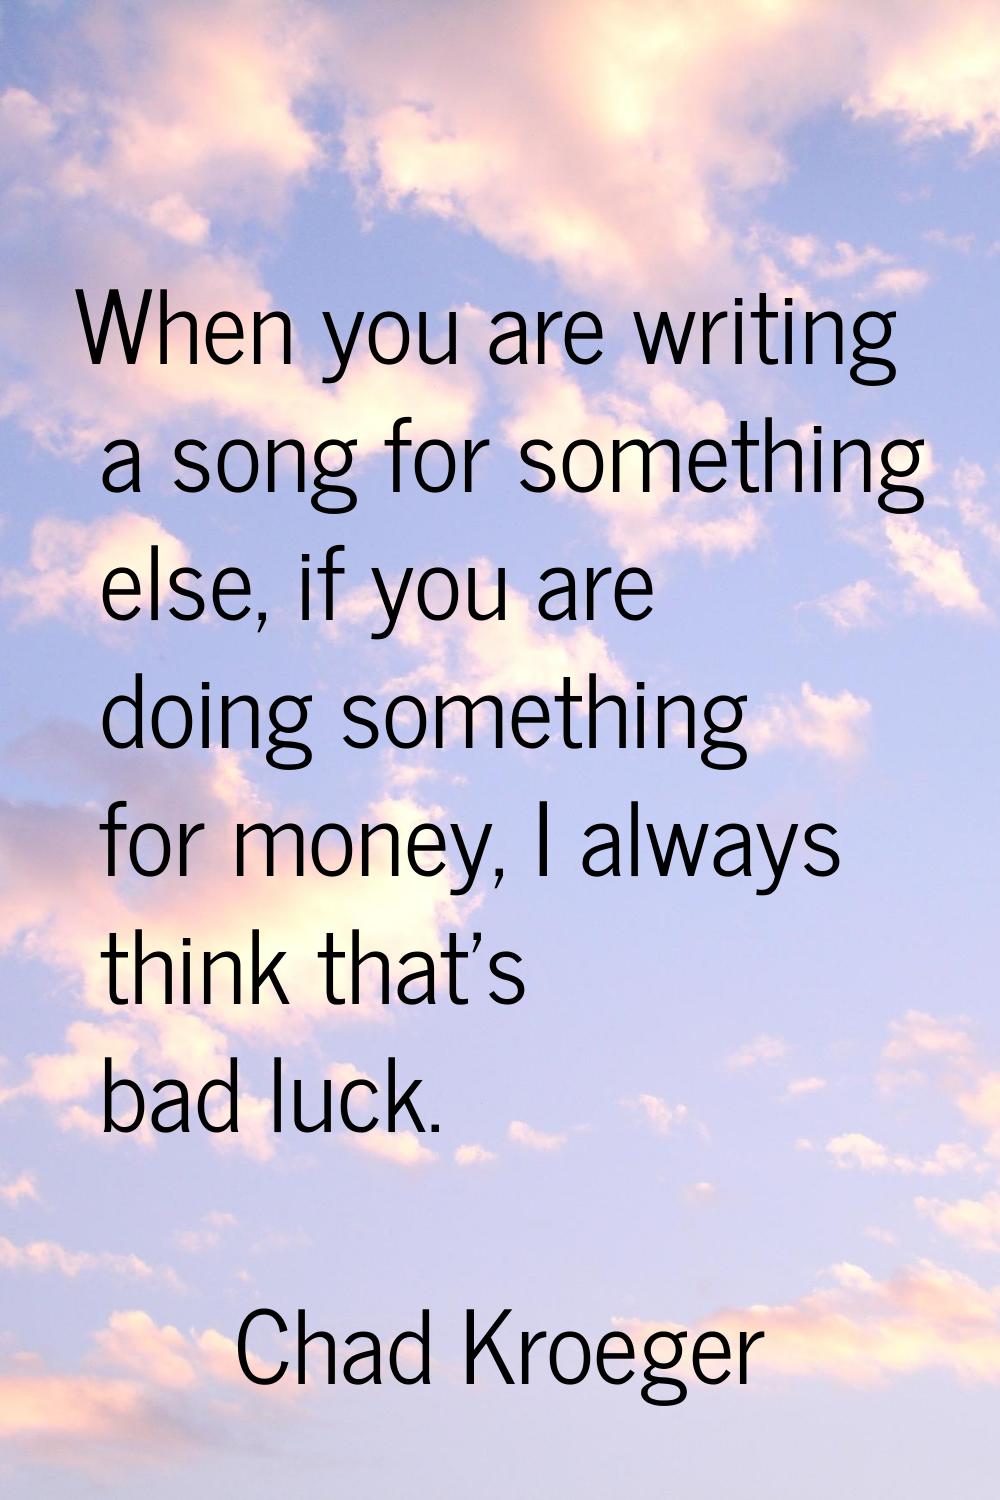 When you are writing a song for something else, if you are doing something for money, I always thin